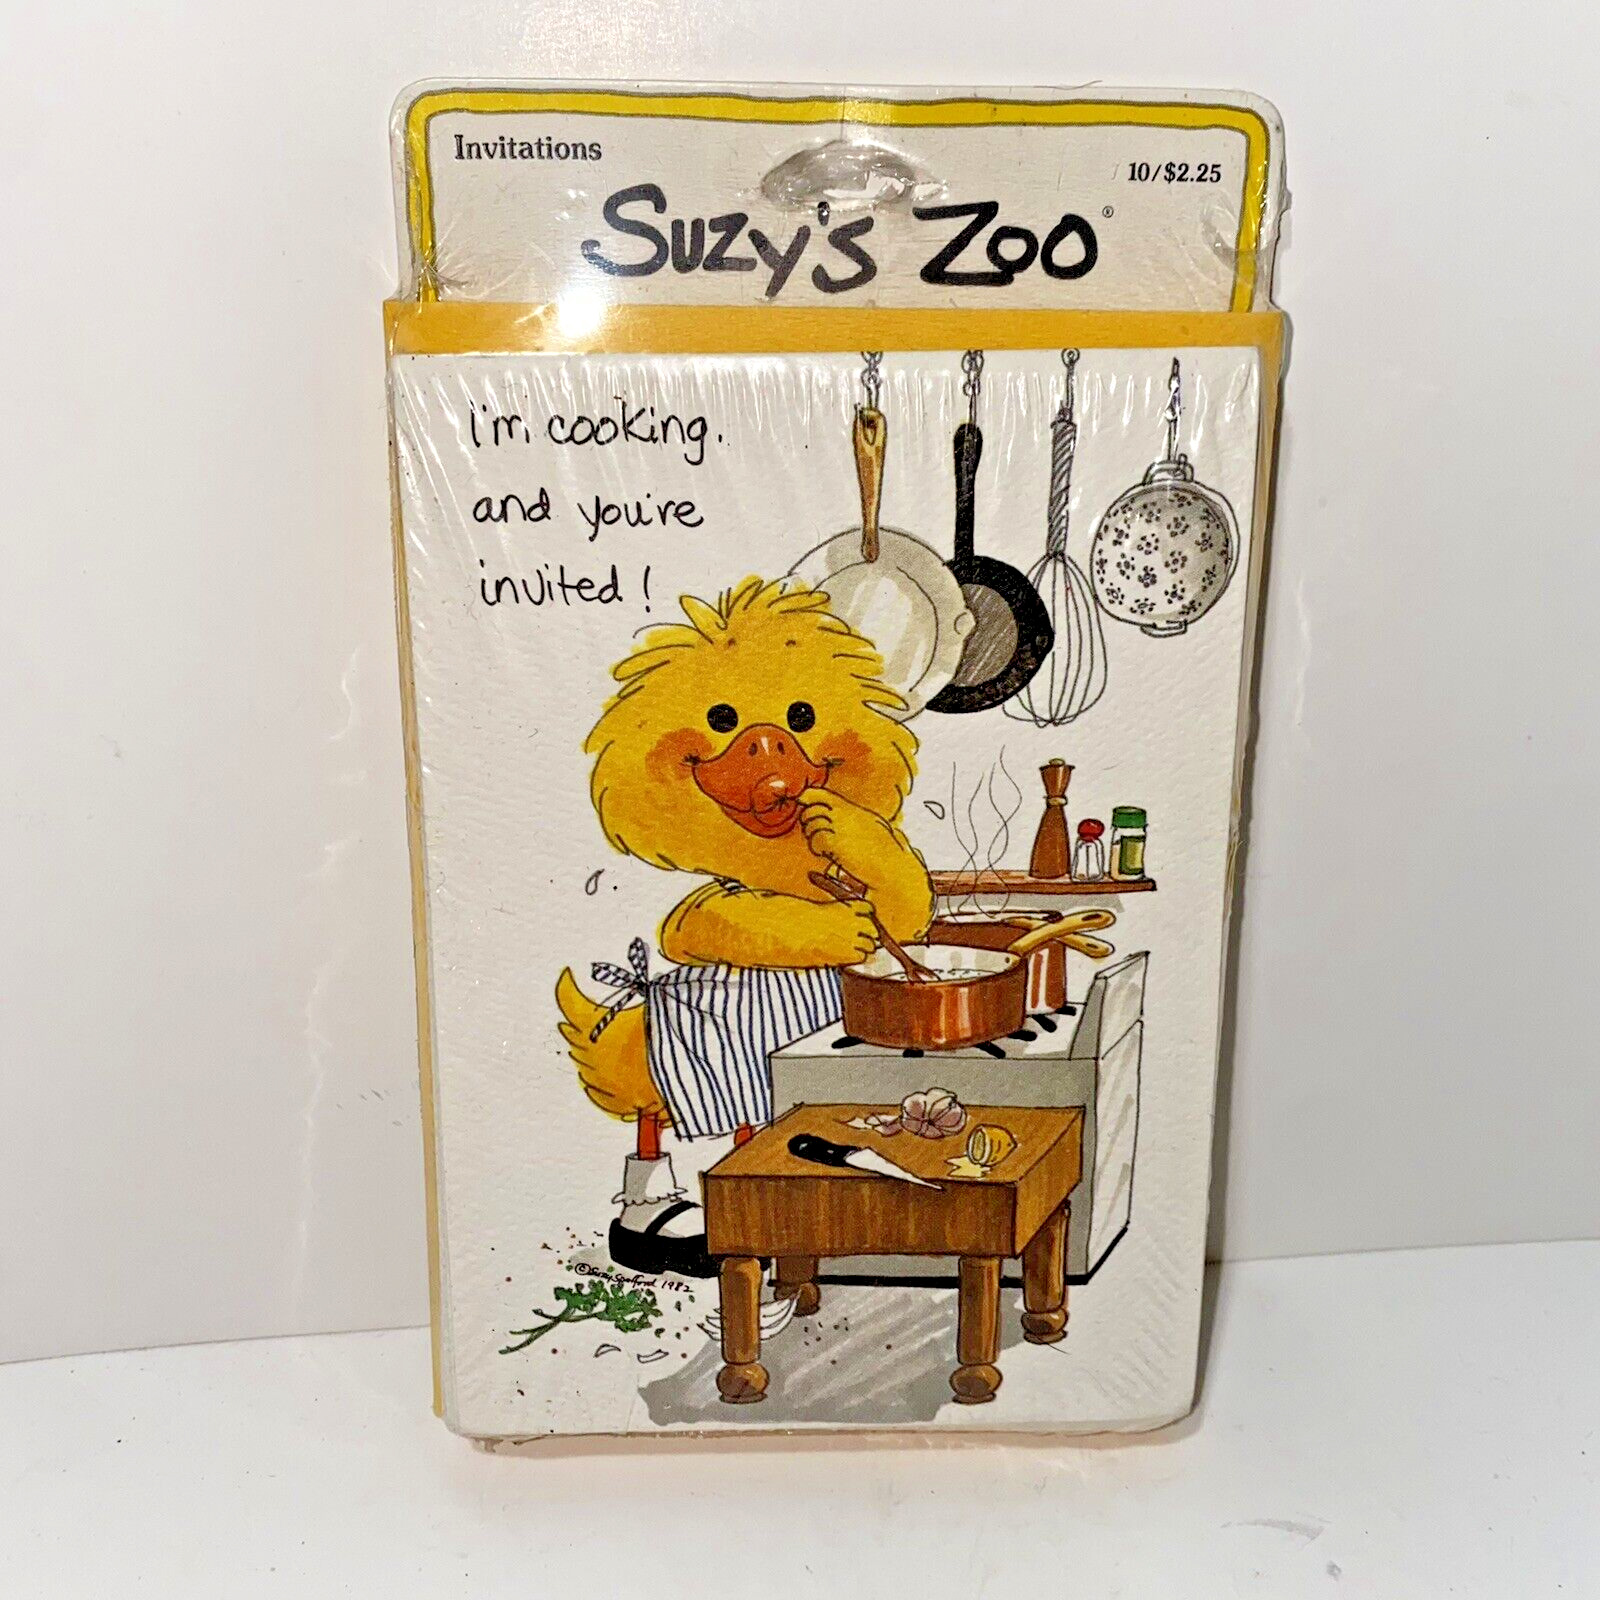 Vintage Suzy\'s Zoo Dinner Party Invitations 10 Invitations and 10 Envelopes